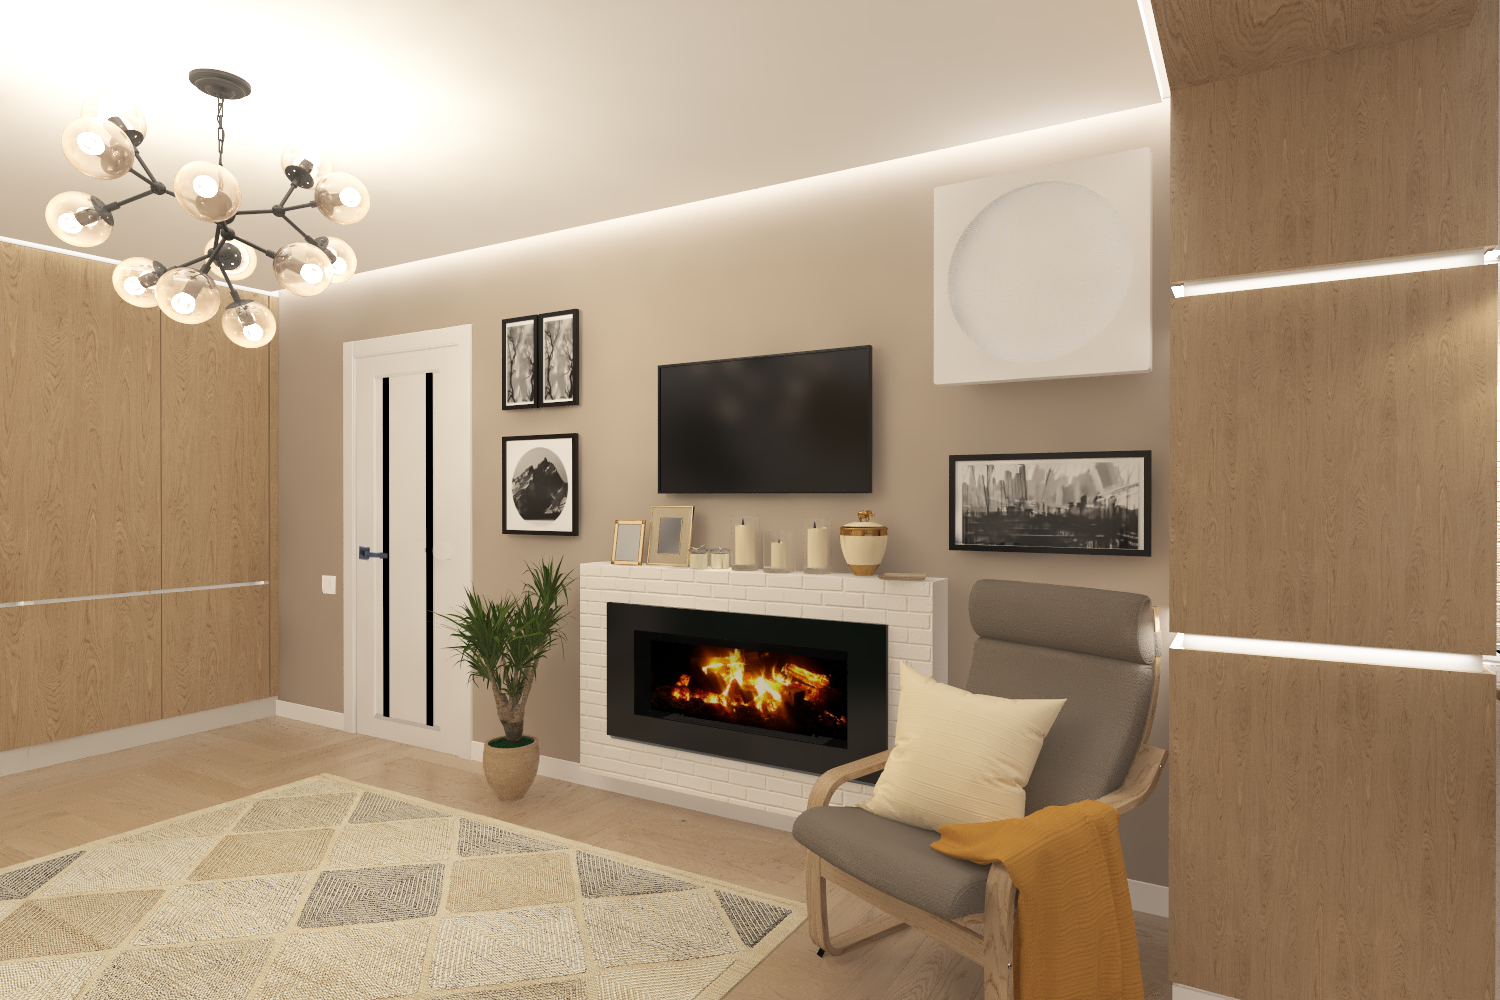 Loft Hall in 3d max vray 3.0 image